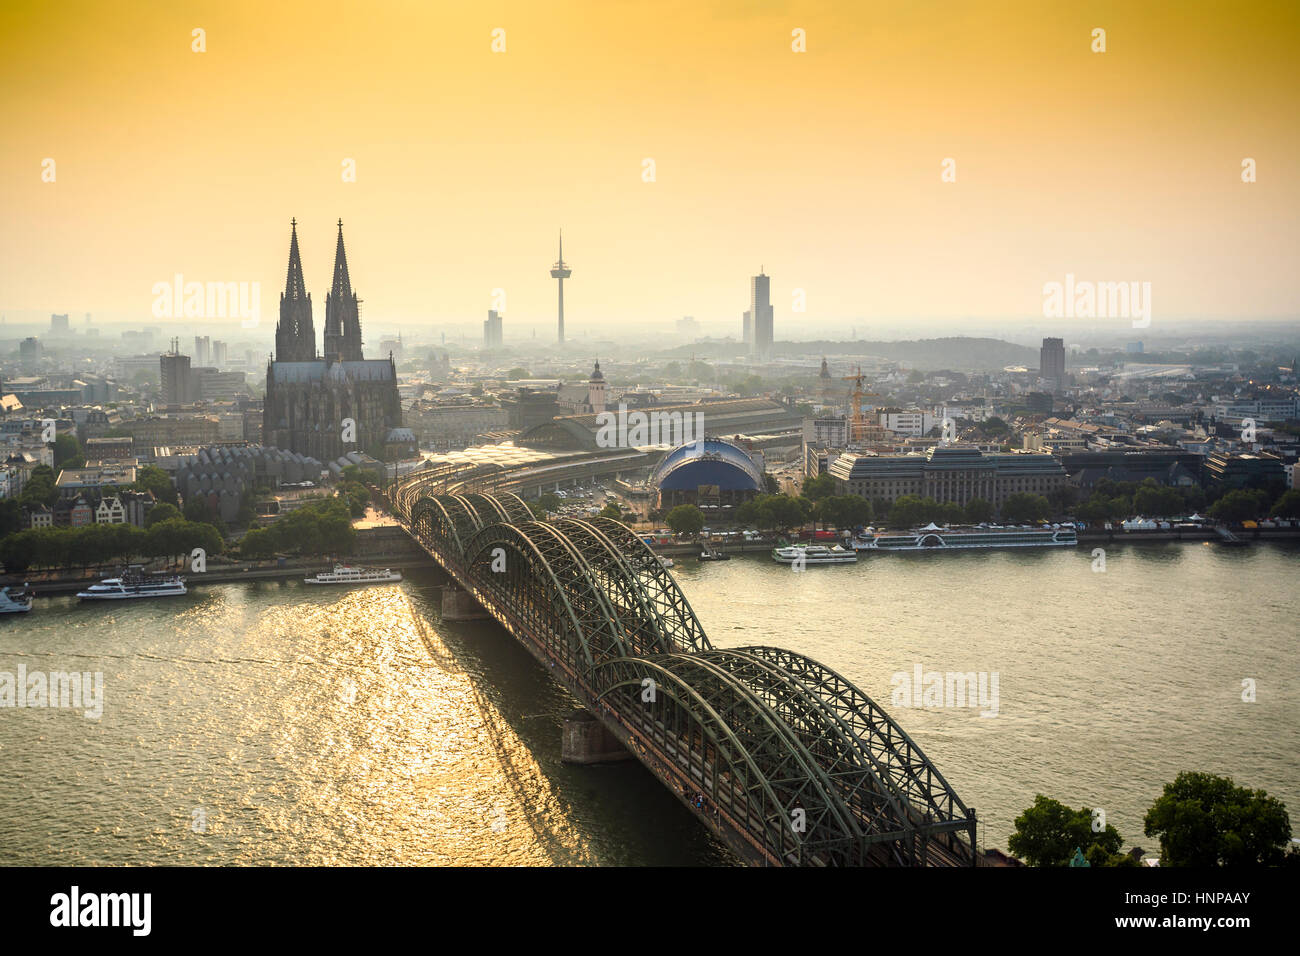 Cityscape with cathedral and steel bridge, Koln, Germany Stock Photo